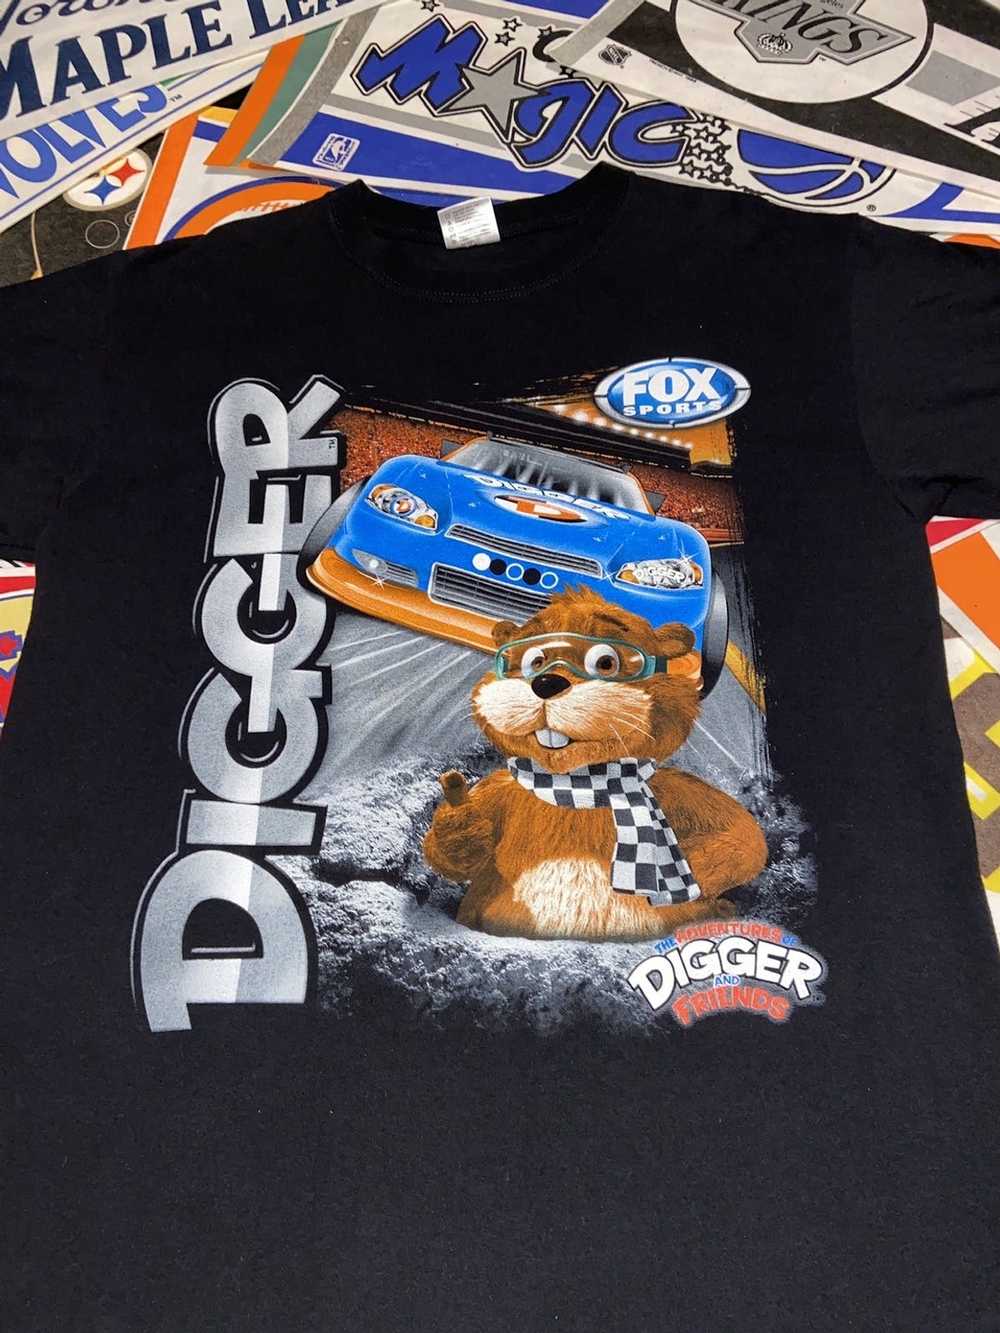 Chase Authentics Digger Fox News racing tee - image 2